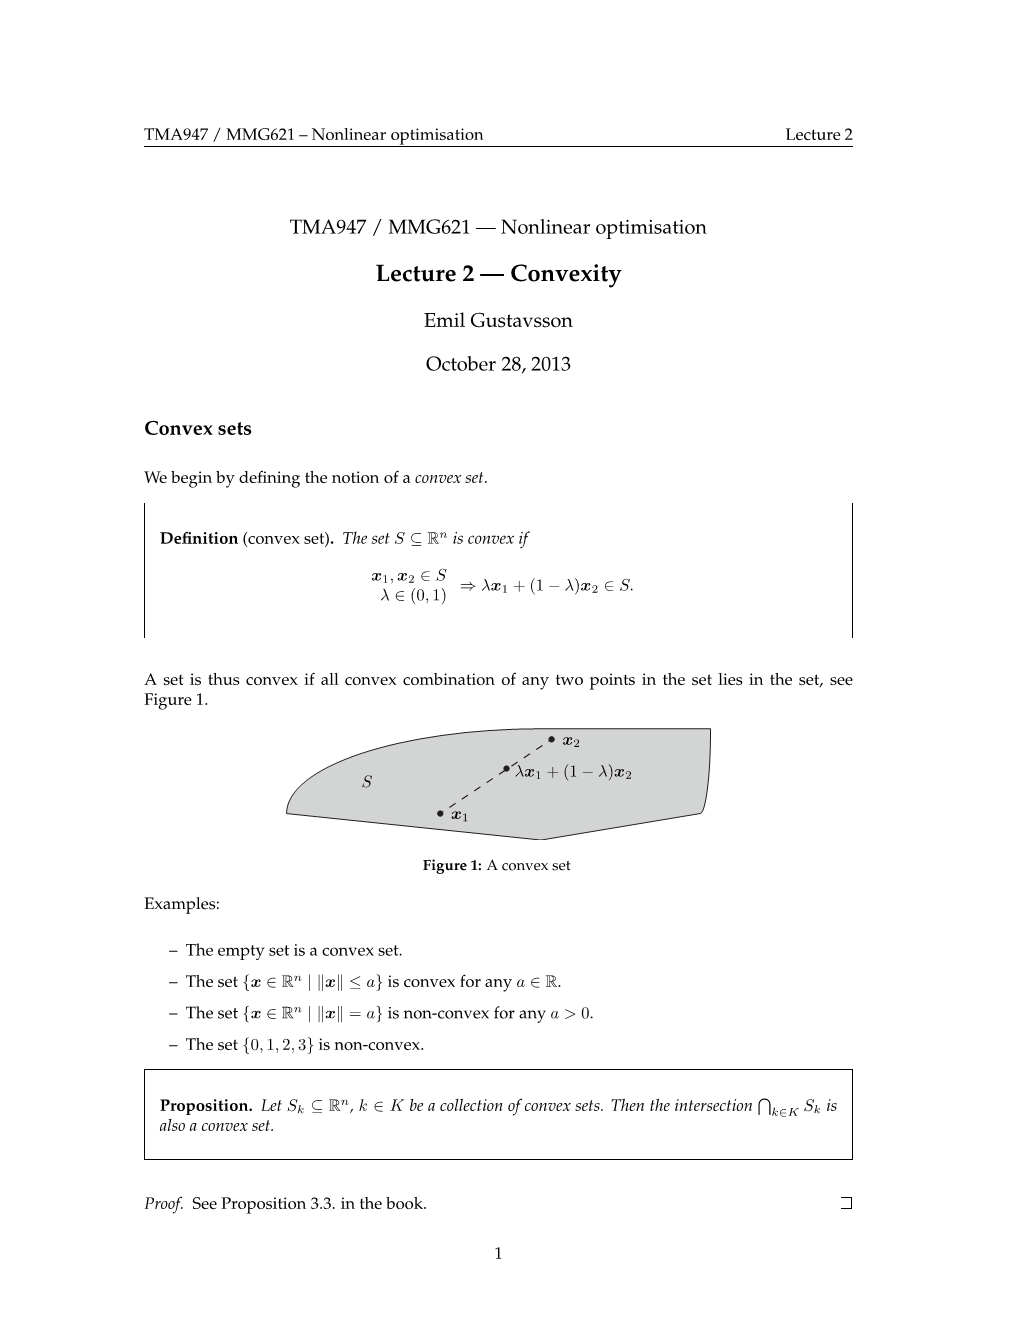 Lecture 2 — Convexity